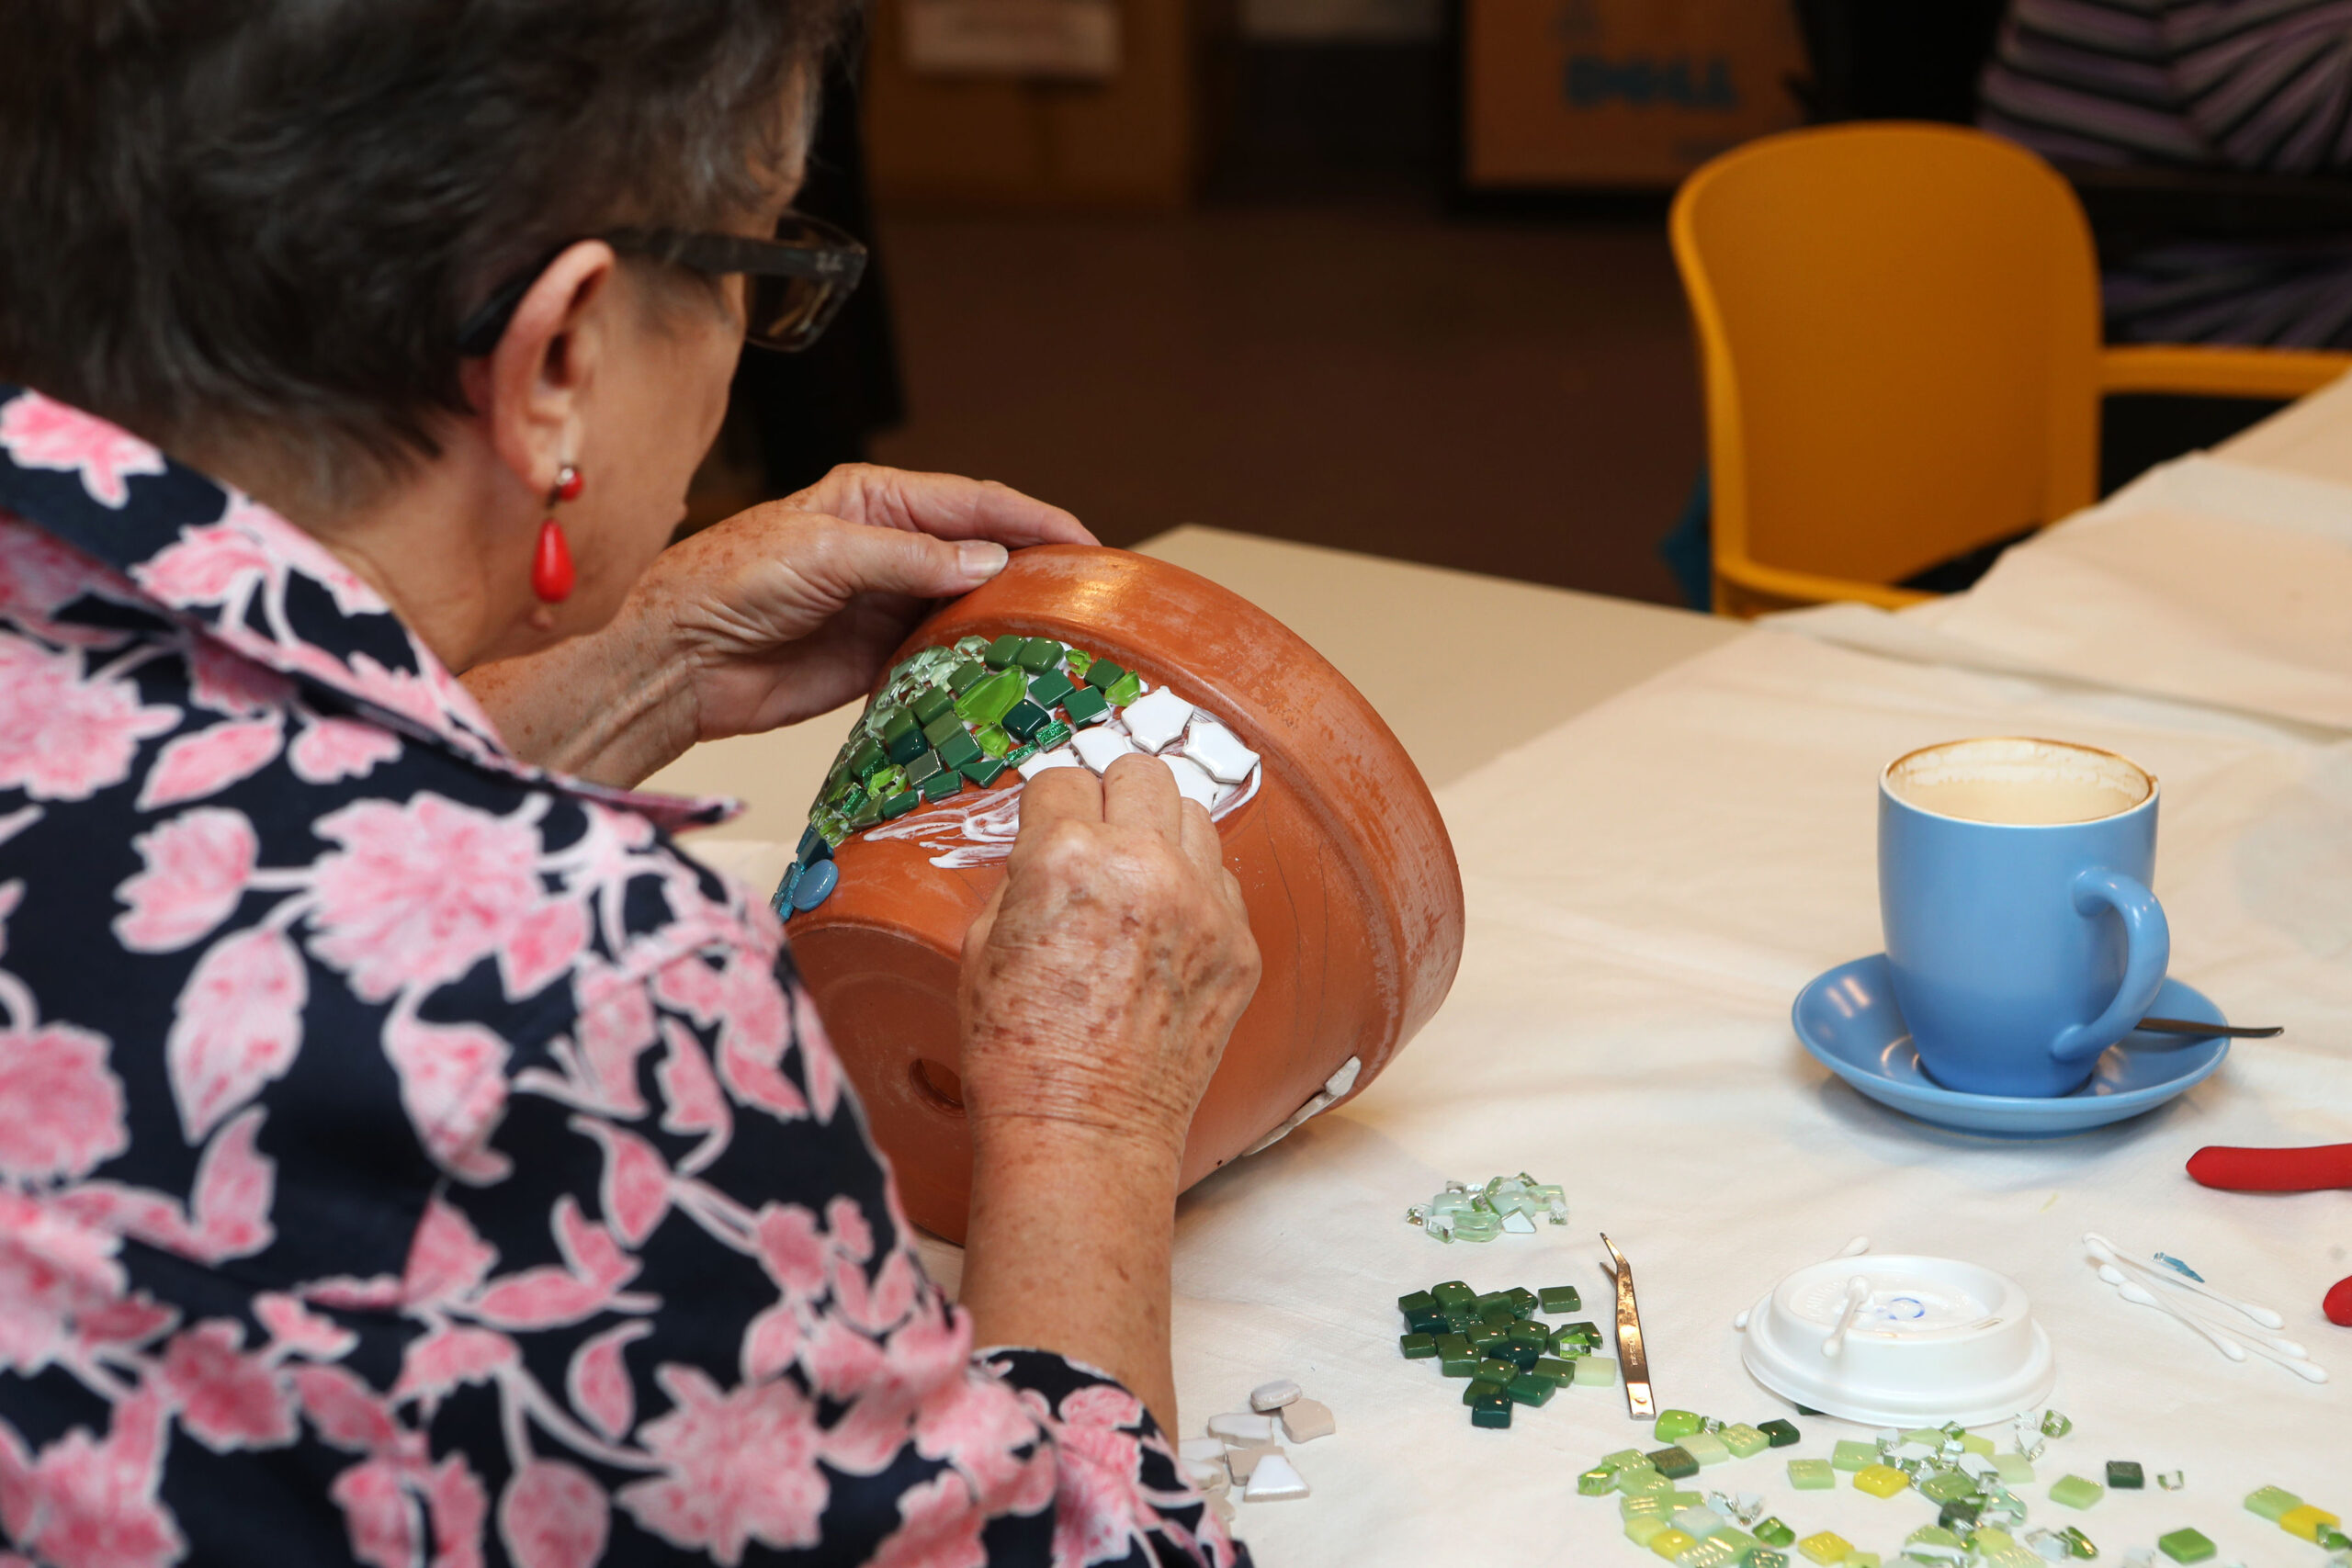 Warrigal residents showcasing creativity in an engaging arts and crafts activity.